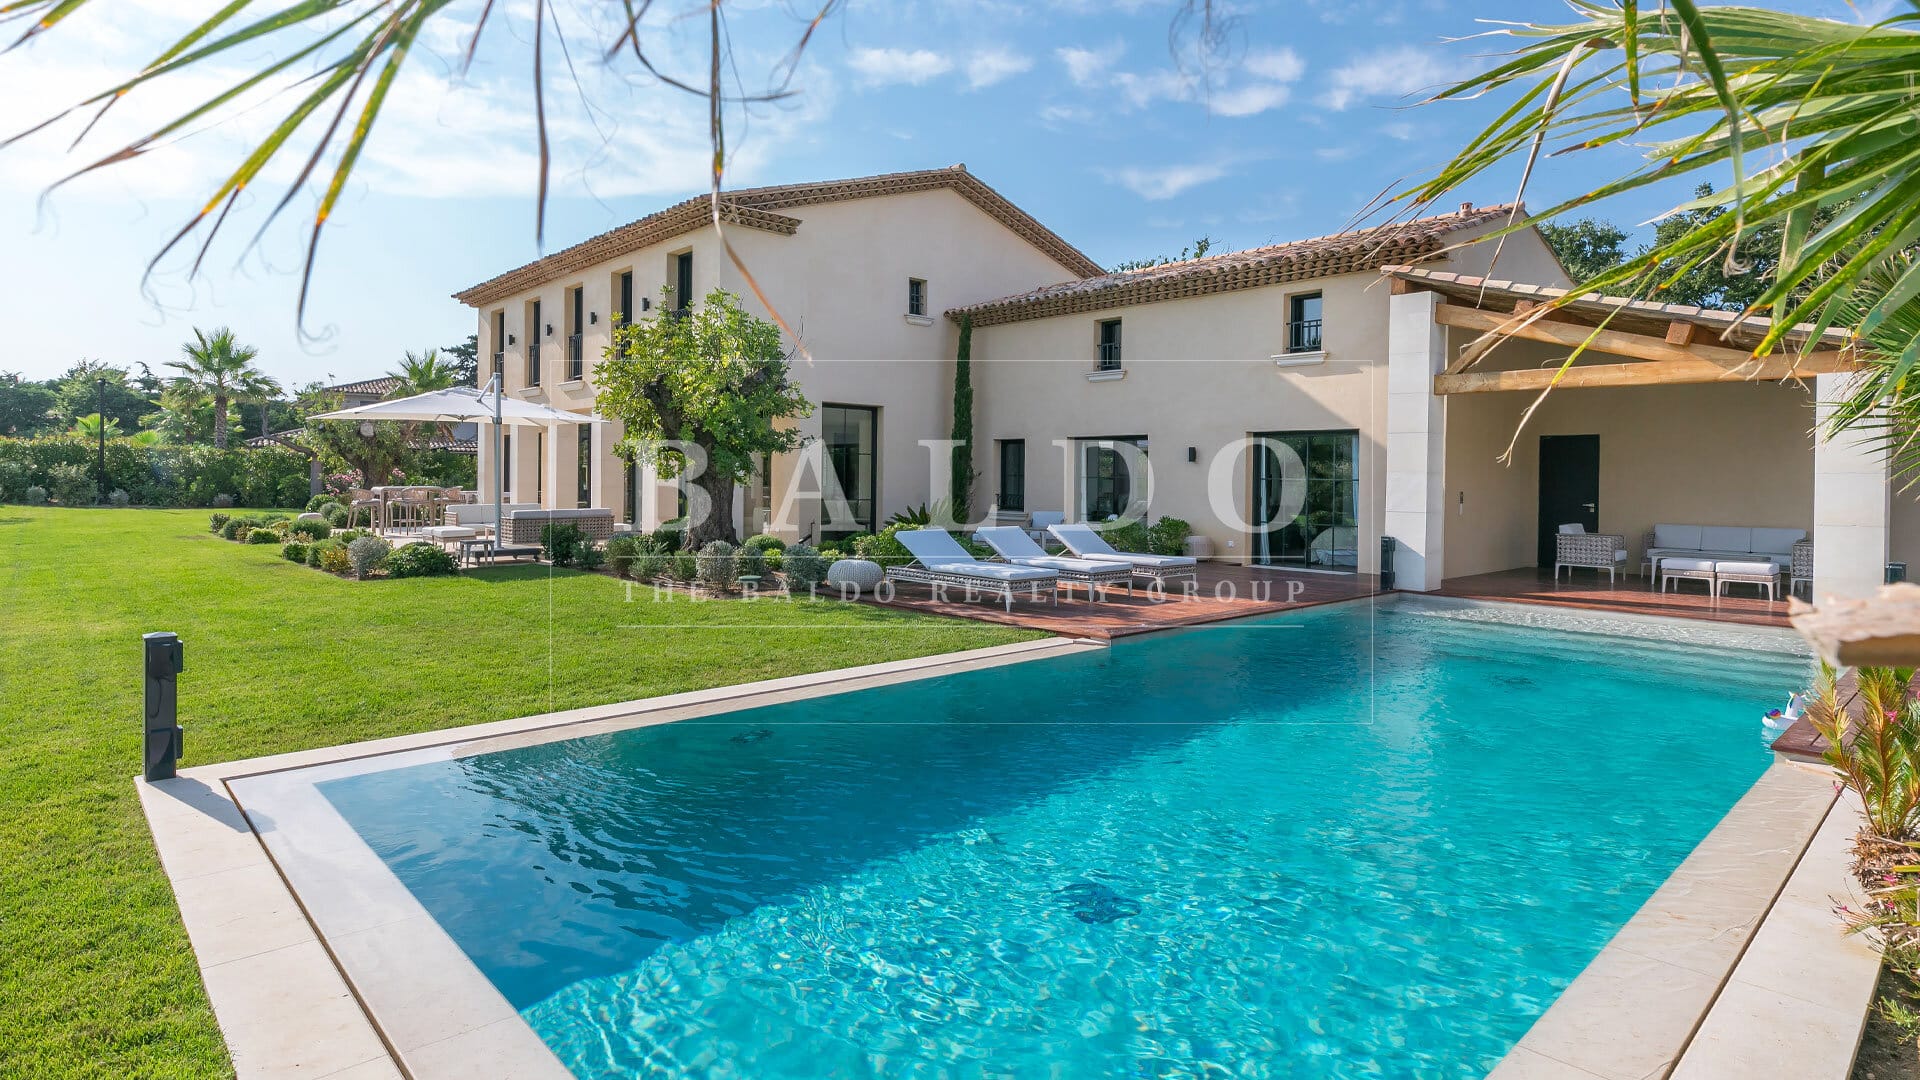 WONDERFUL VILLA WITH POOL FOR RENT IN SAINT TROPEZ - Photo 1